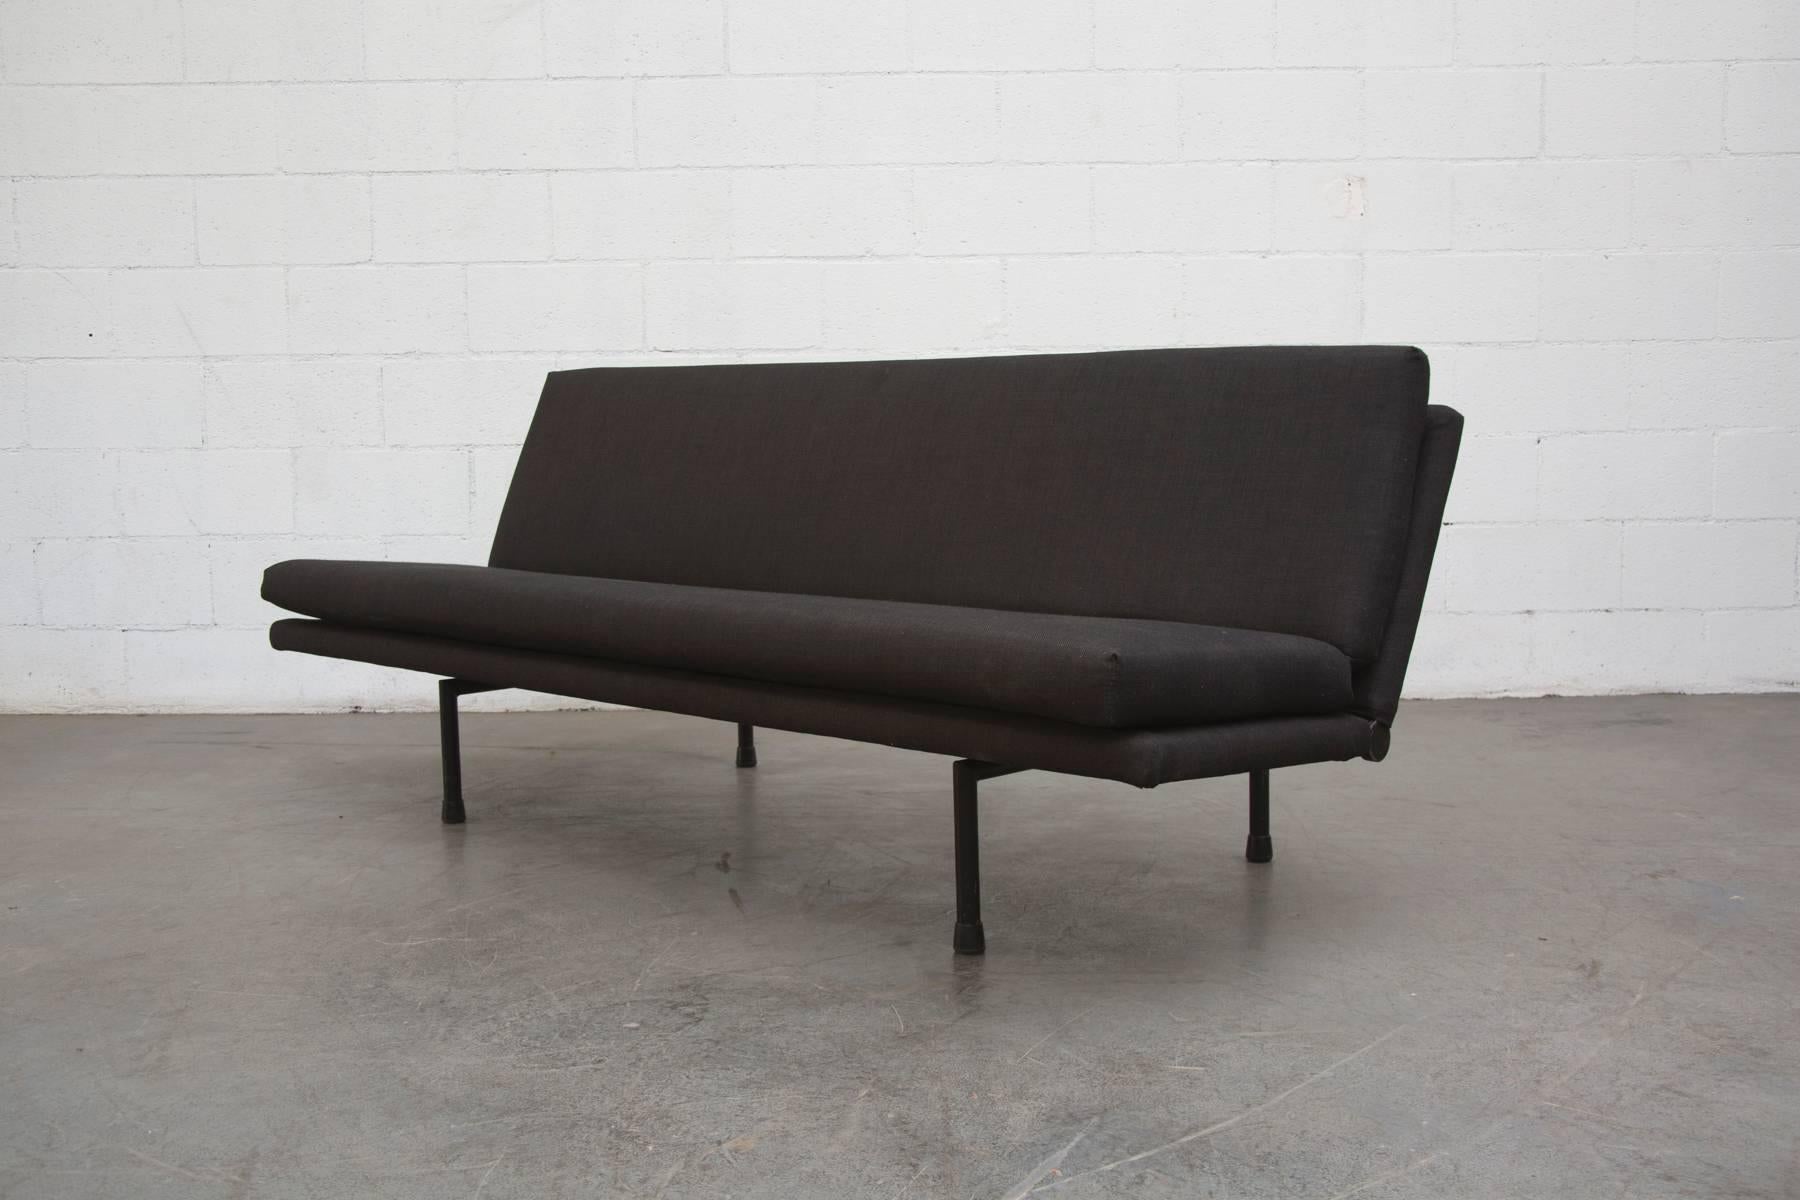 Amazing convertible sofa completely re-upholstered in black. Very French Industrial moderne. Frame is in original condition with visible signs of wear. Some enamel loss consistent with its age and usage. See matching lounge chairs that also convert